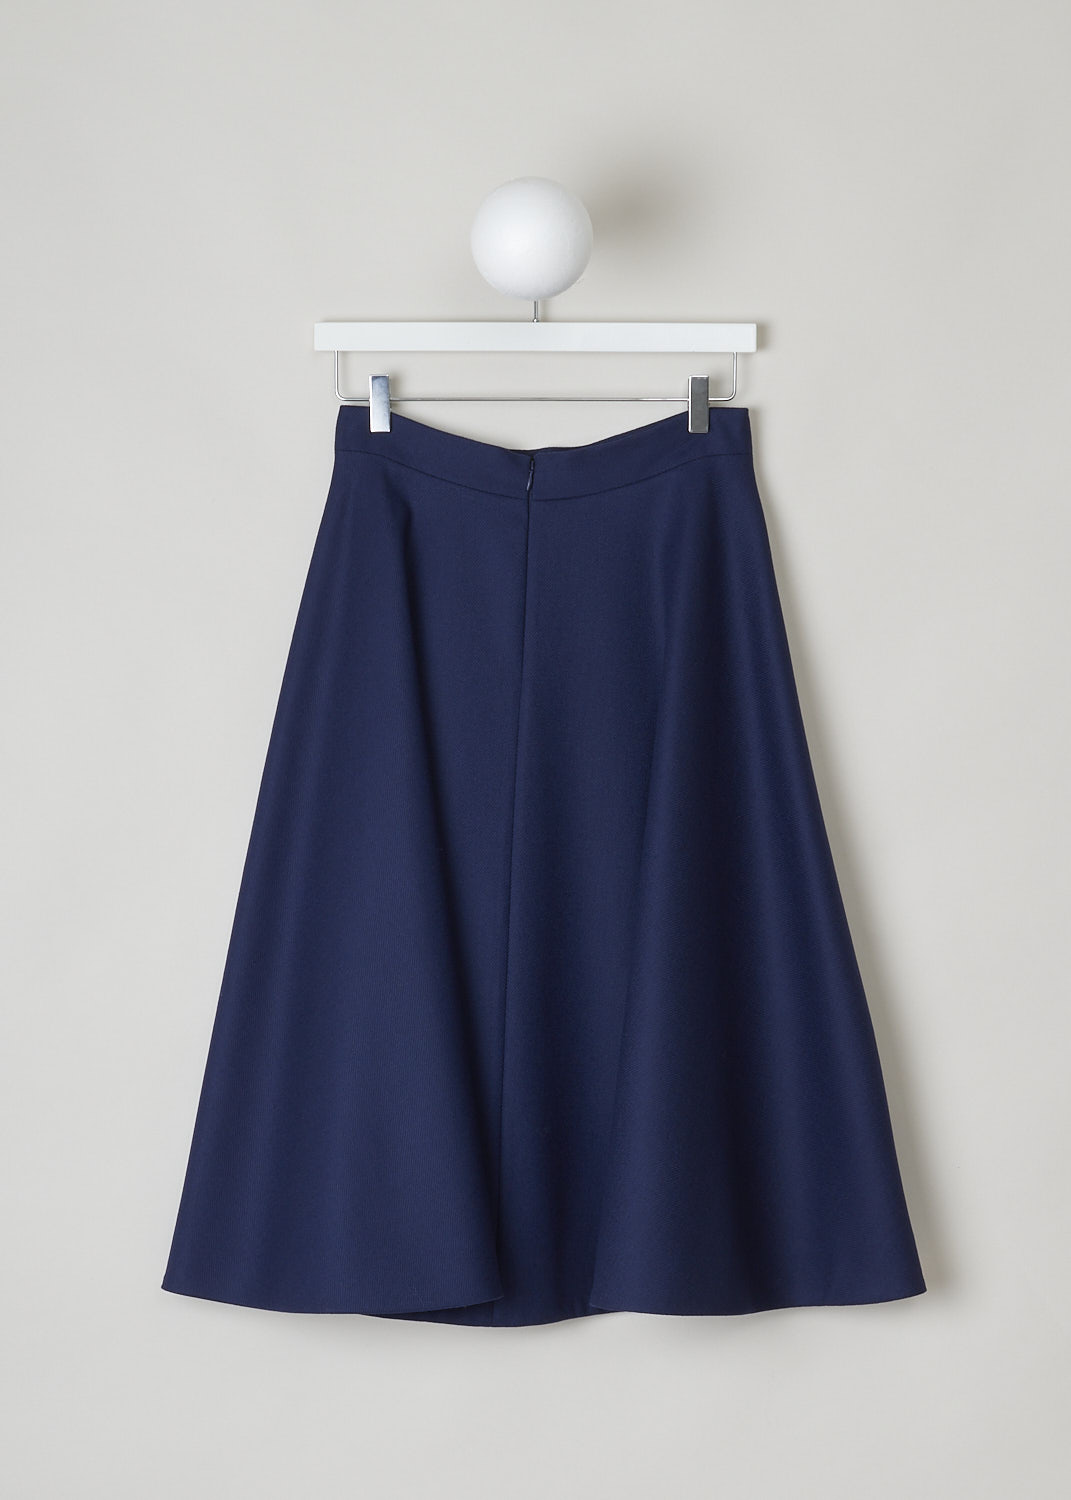 MARNI, NAVY BLUE WOOL MIDI SKIRT, GOMA0300U0_TW902_00B81, Blue, Back, This navy blue wool midi skirt has an A-line silhouette with a straight hemline. The skirt has a concealed centre zip in the back. 
